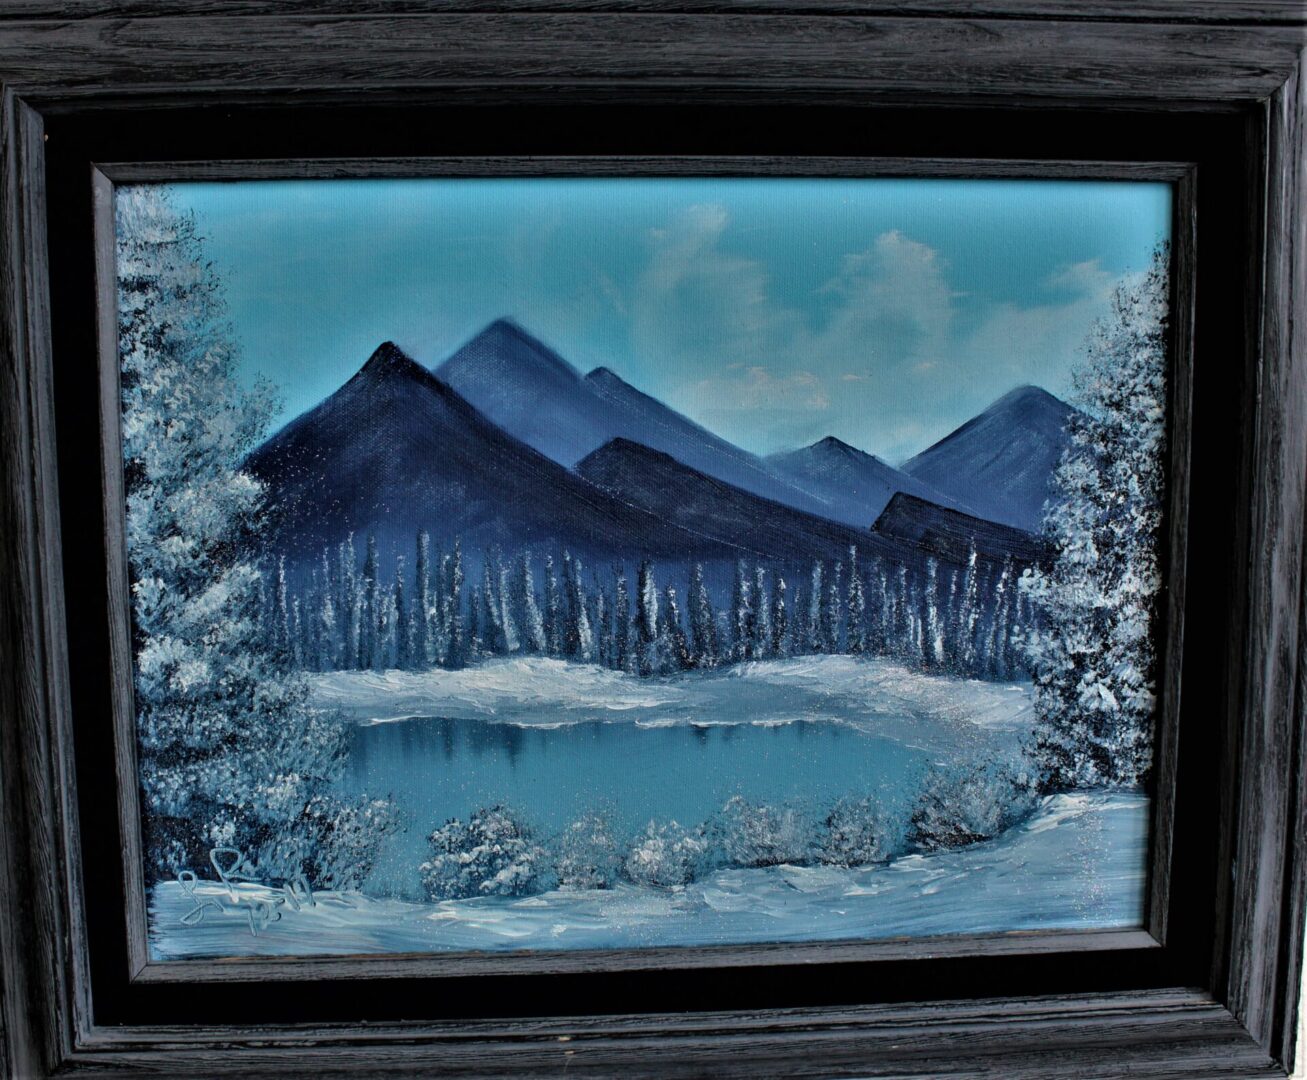 Painting of a mountain with snow scenery with a black frame